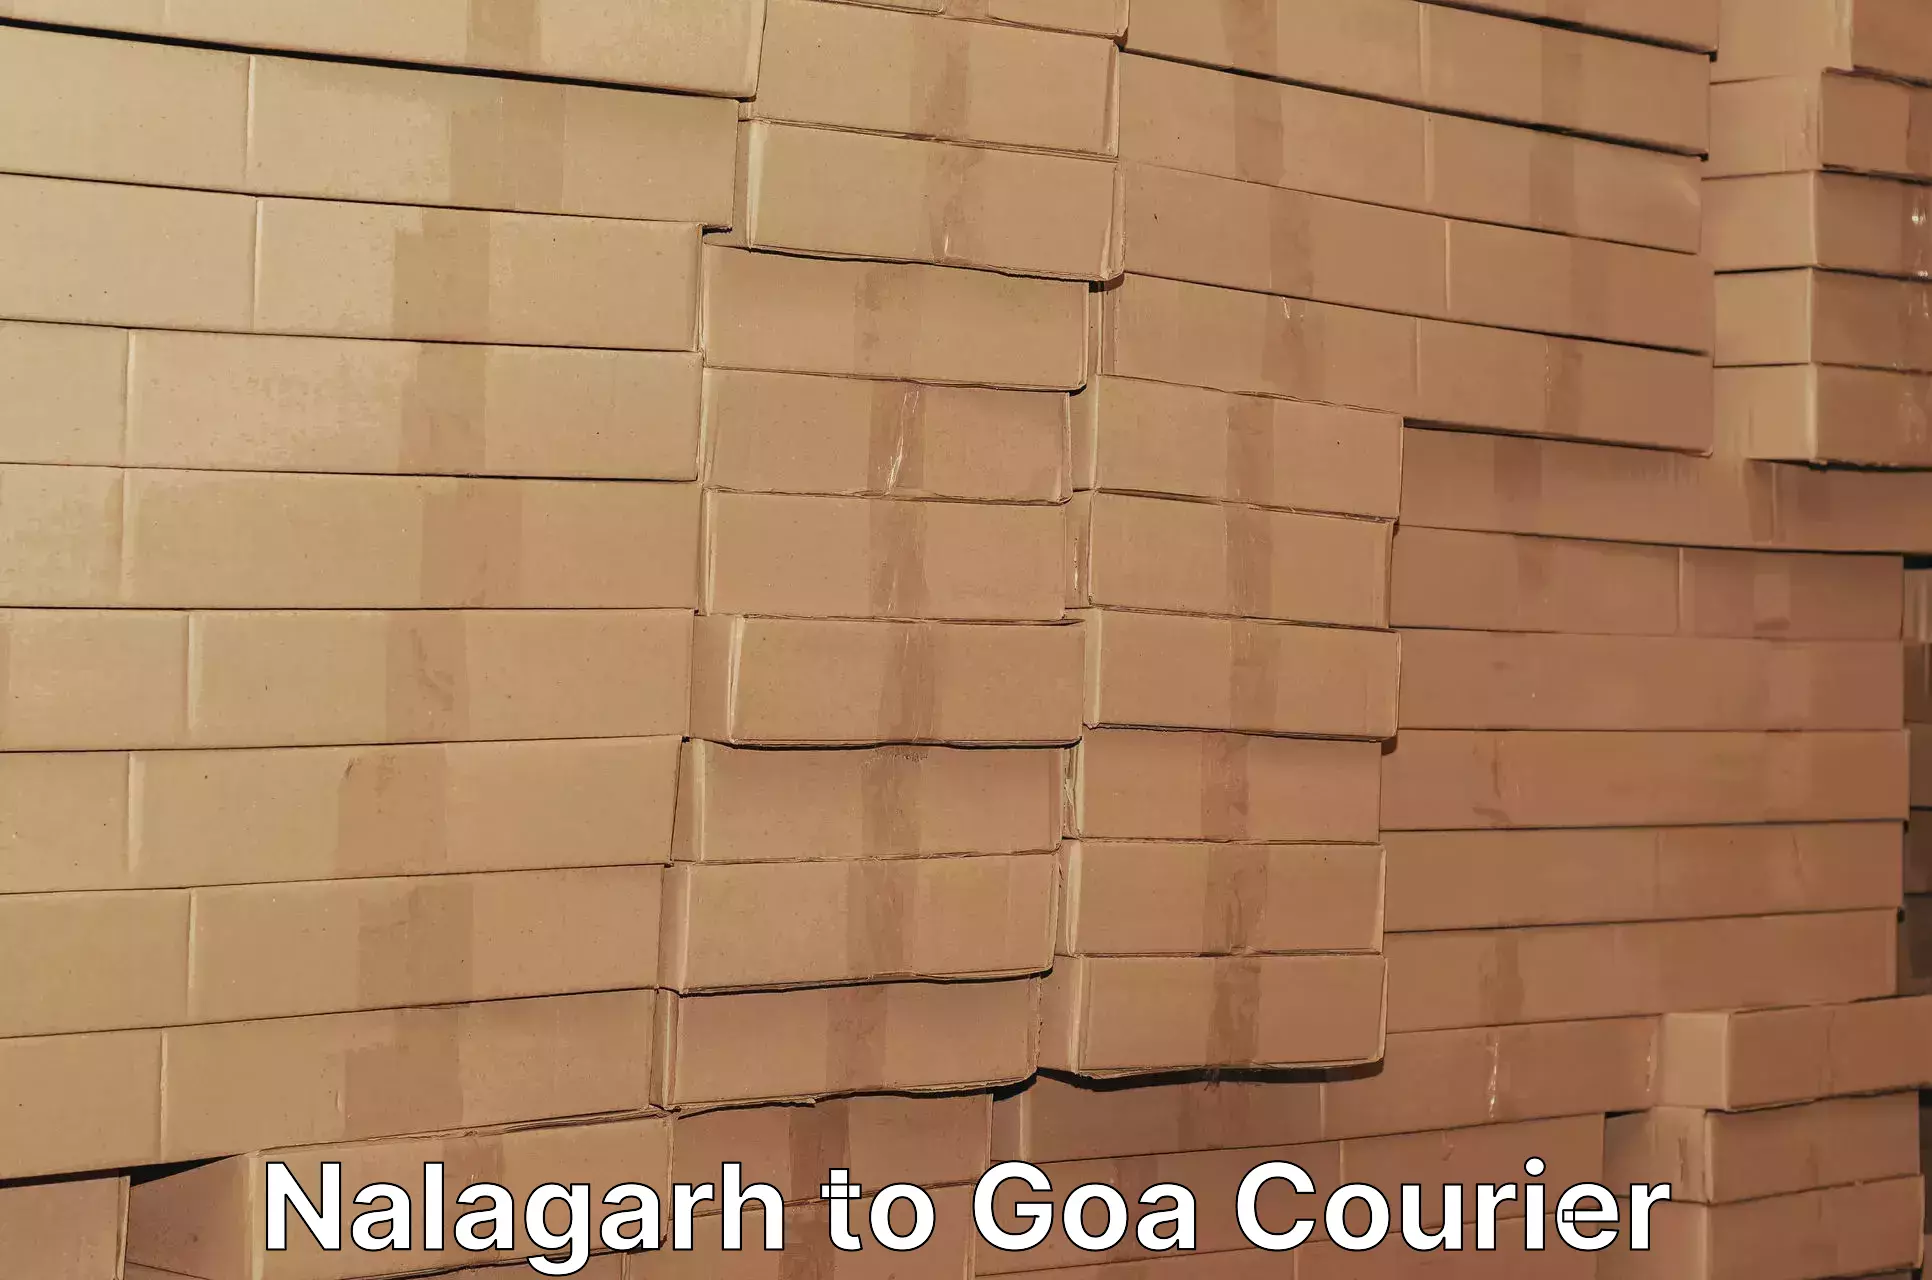 Reliable delivery network Nalagarh to Goa